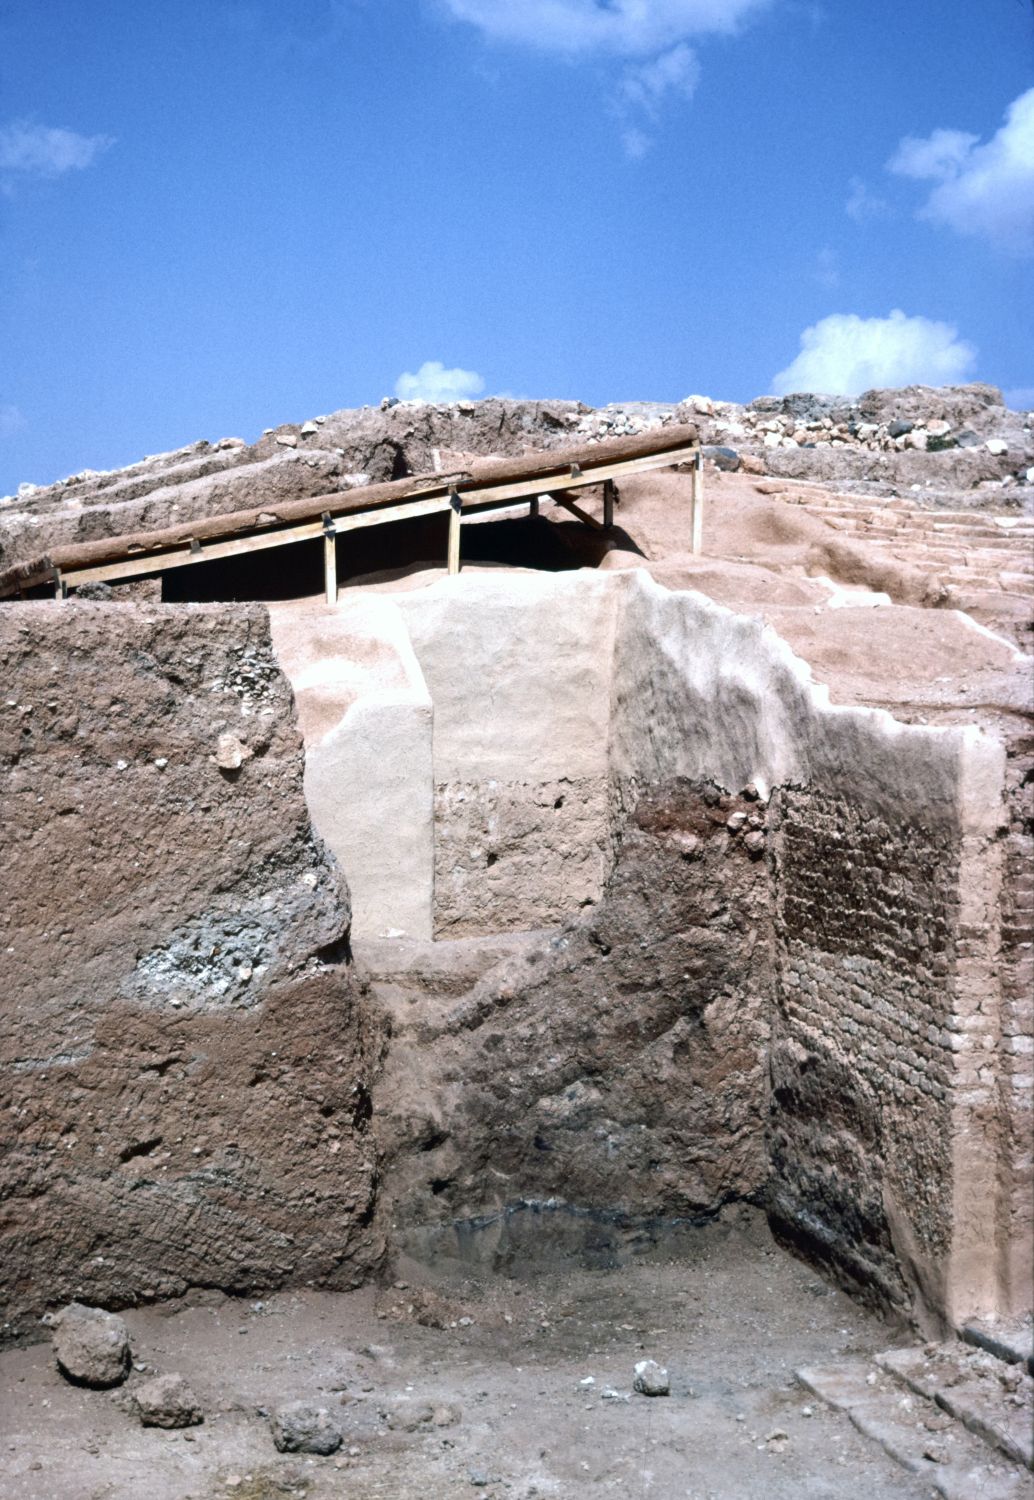 Palace complex, view of excavation near staircase.